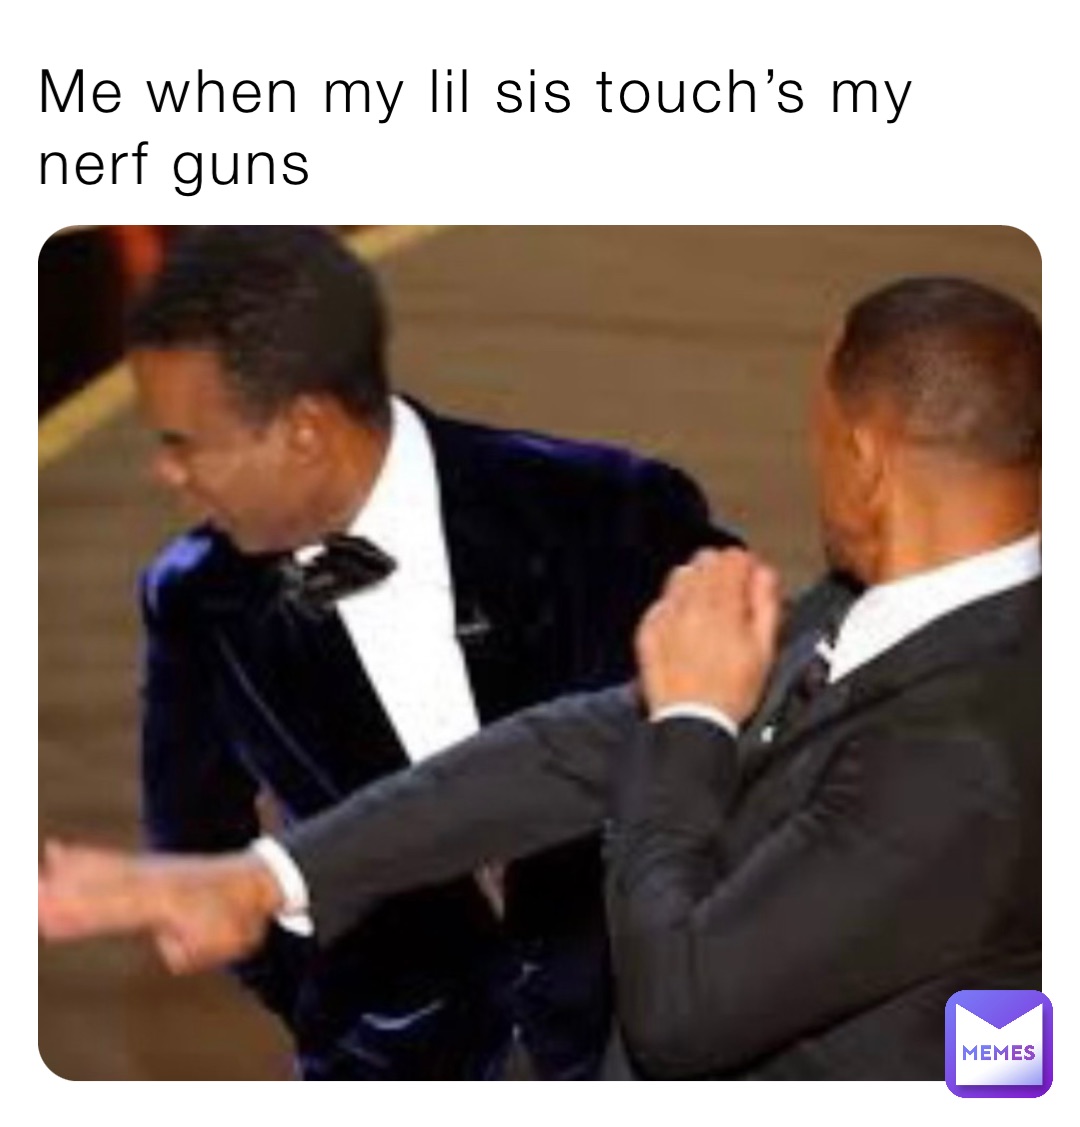 Me when my lil sis touch’s my nerf guns